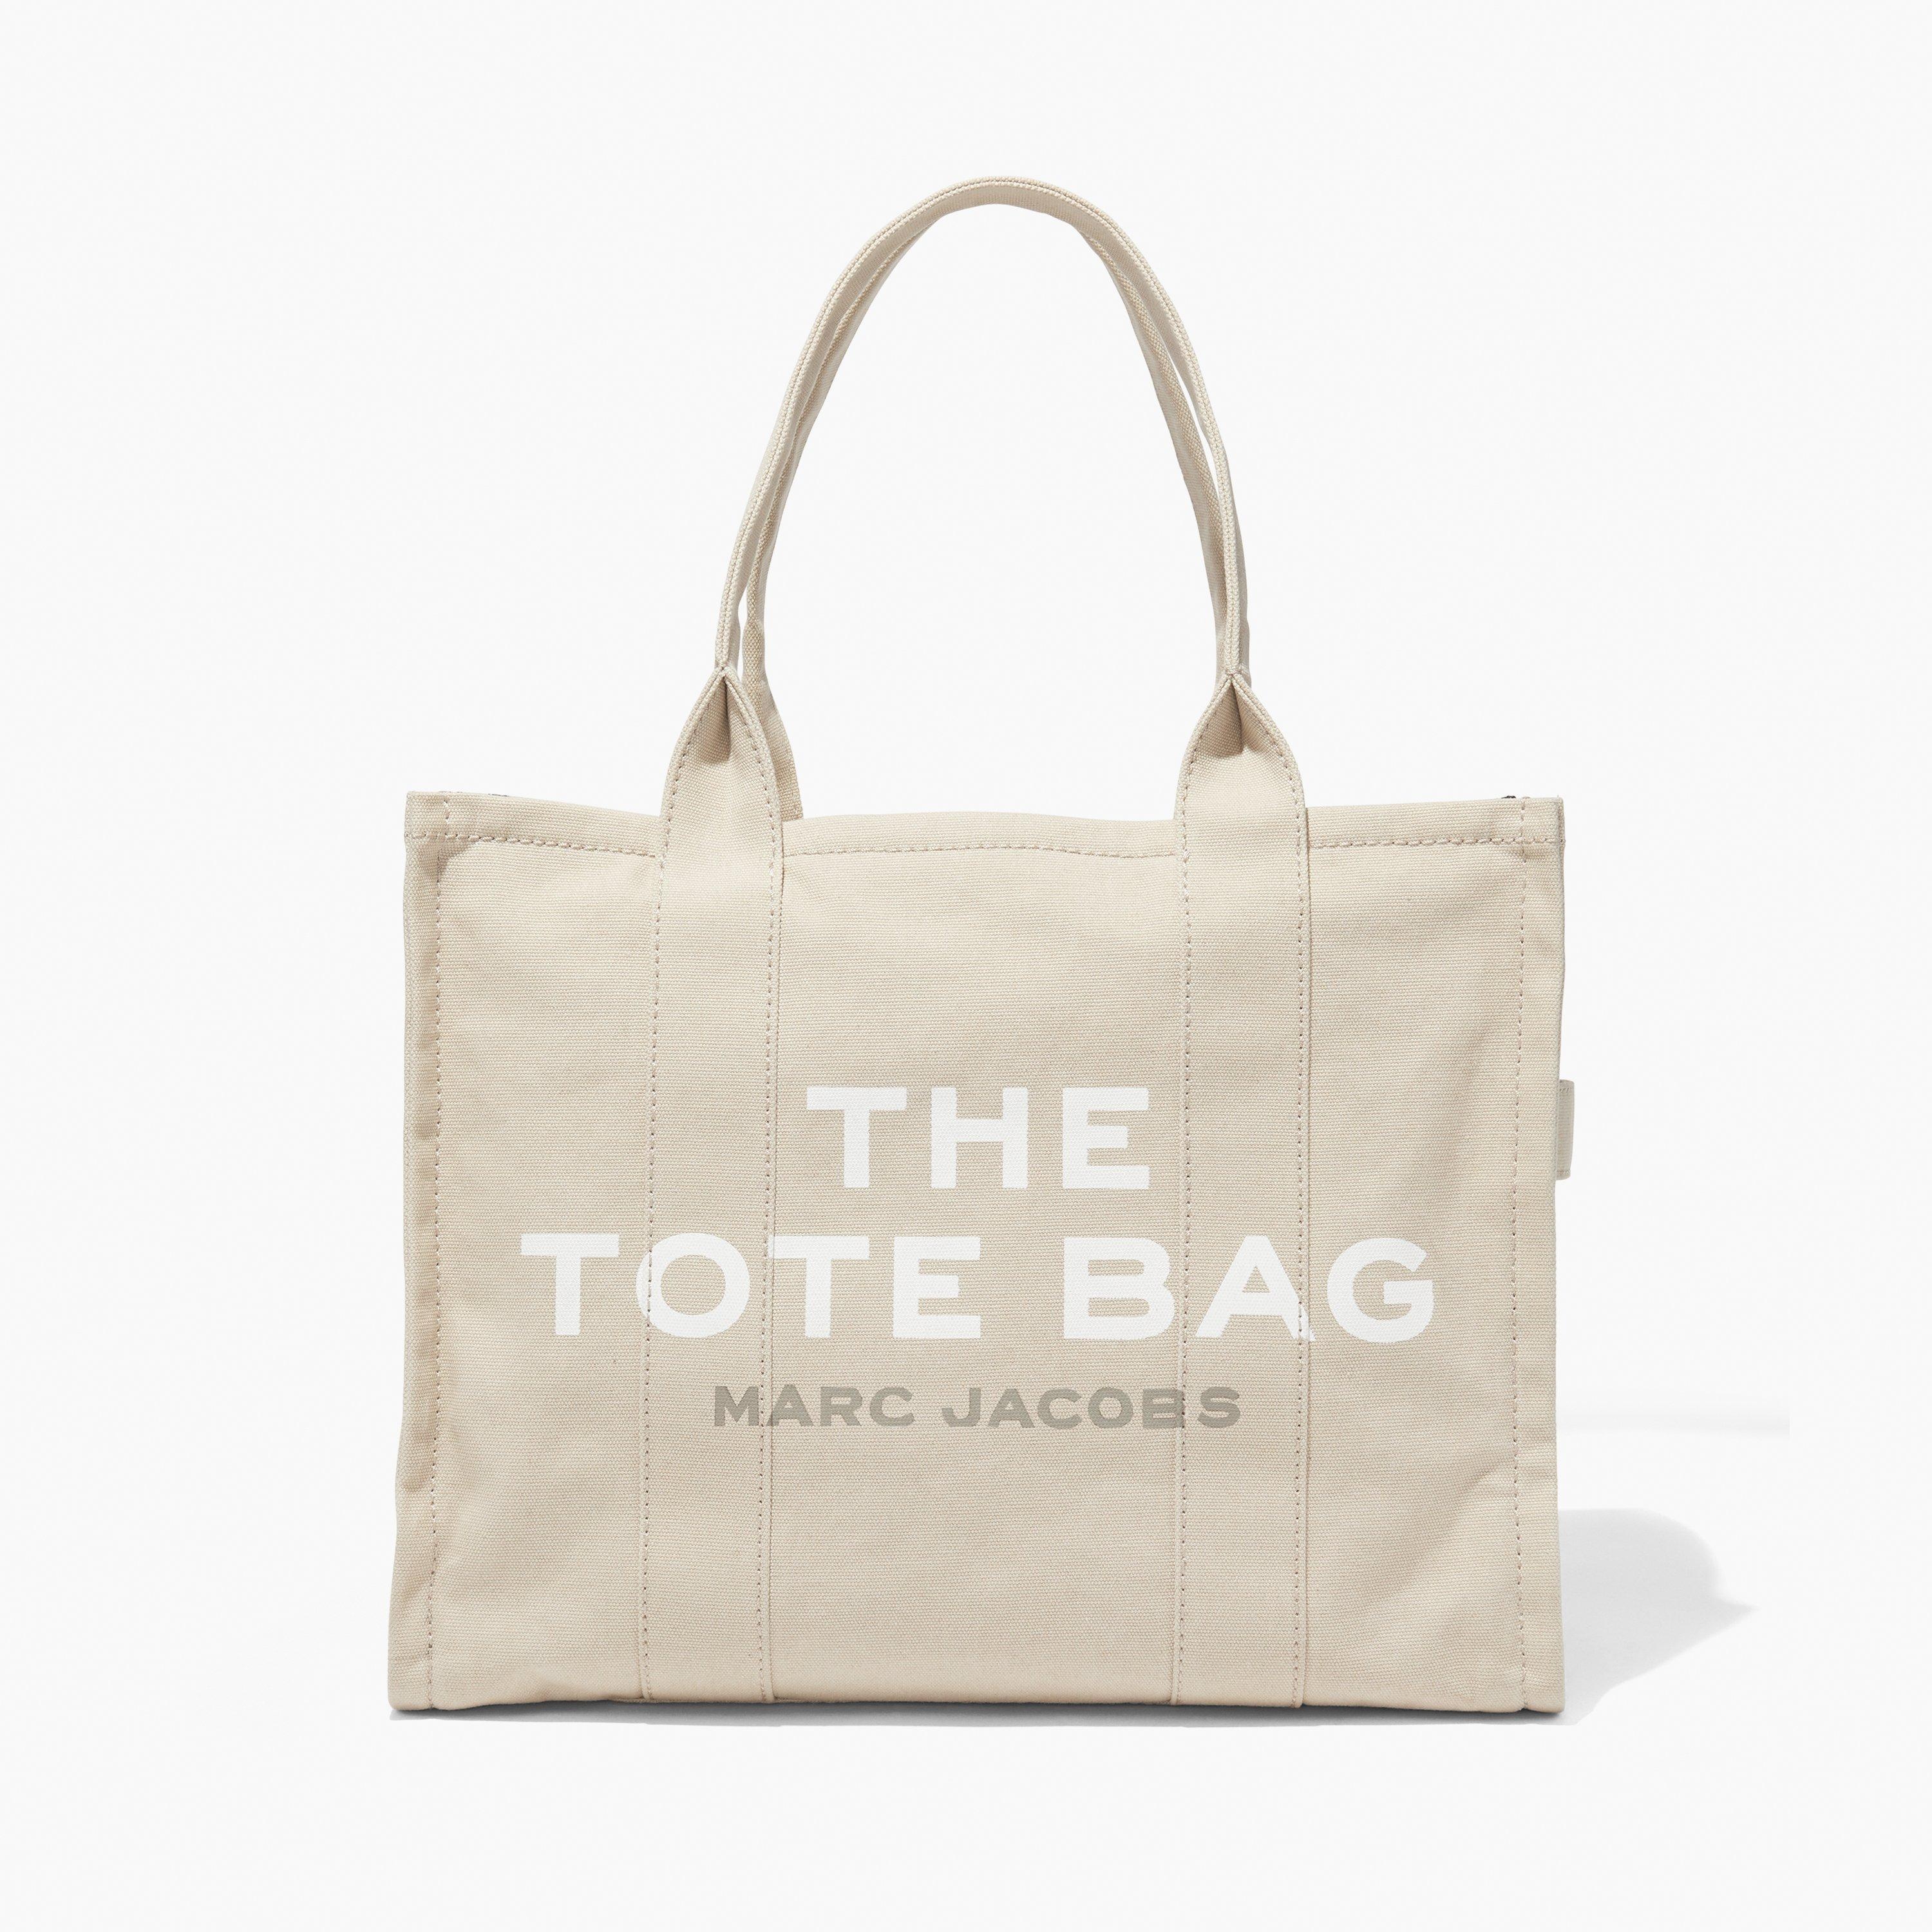 THE LARGE TOTE BAG - 1